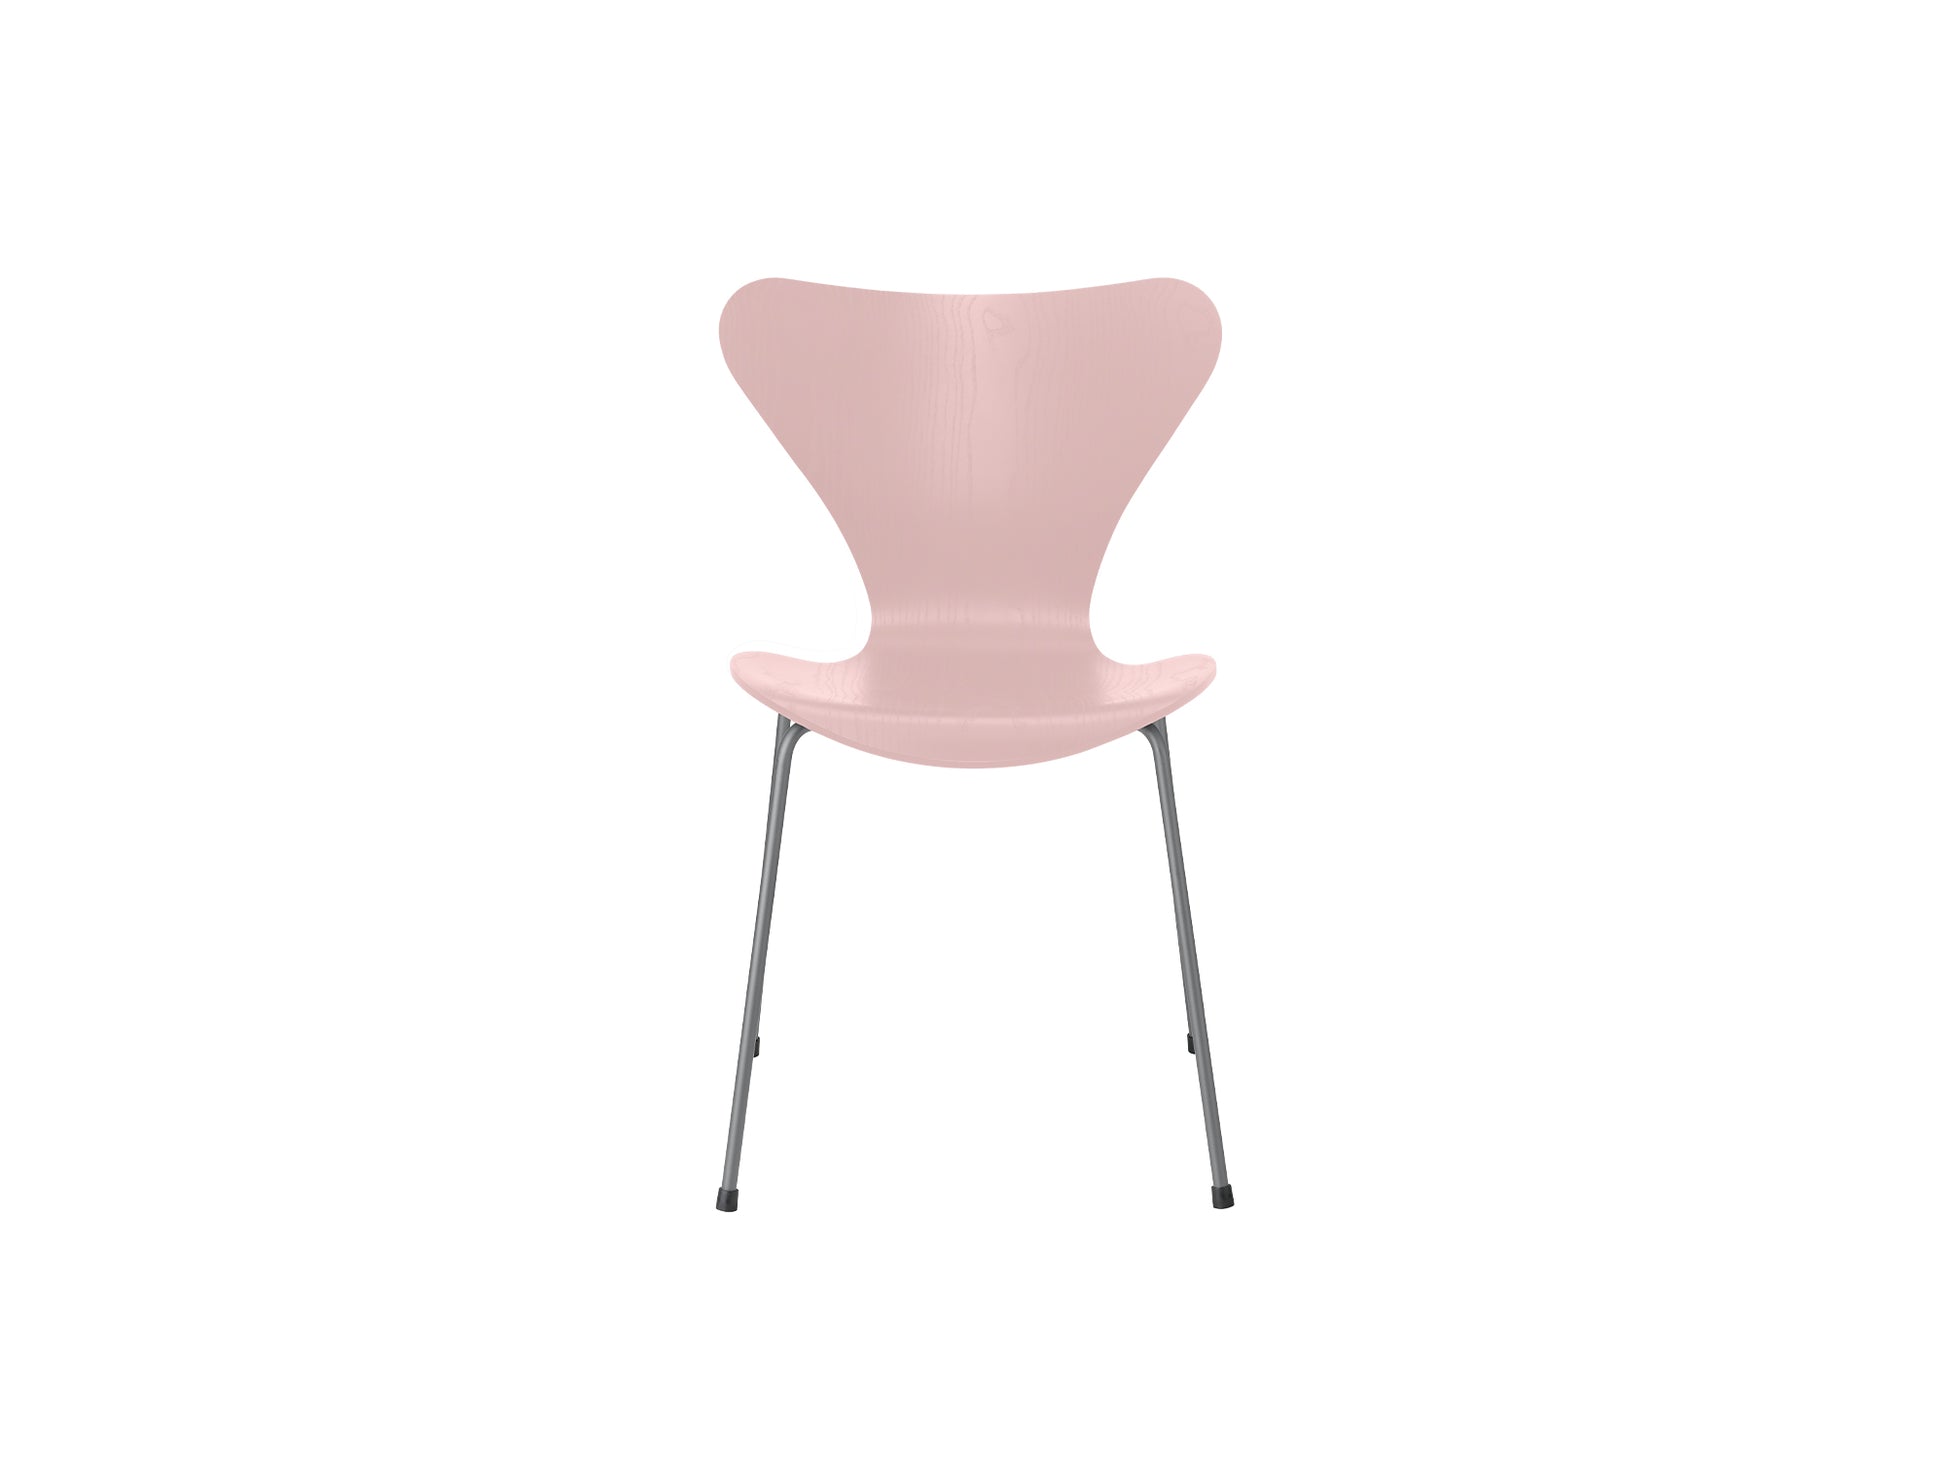 Series 7™ 3107 Dining Chair by Fritz Hansen - Pale Rose Coloured Ash Veneer Shell / Silver Grey Steel